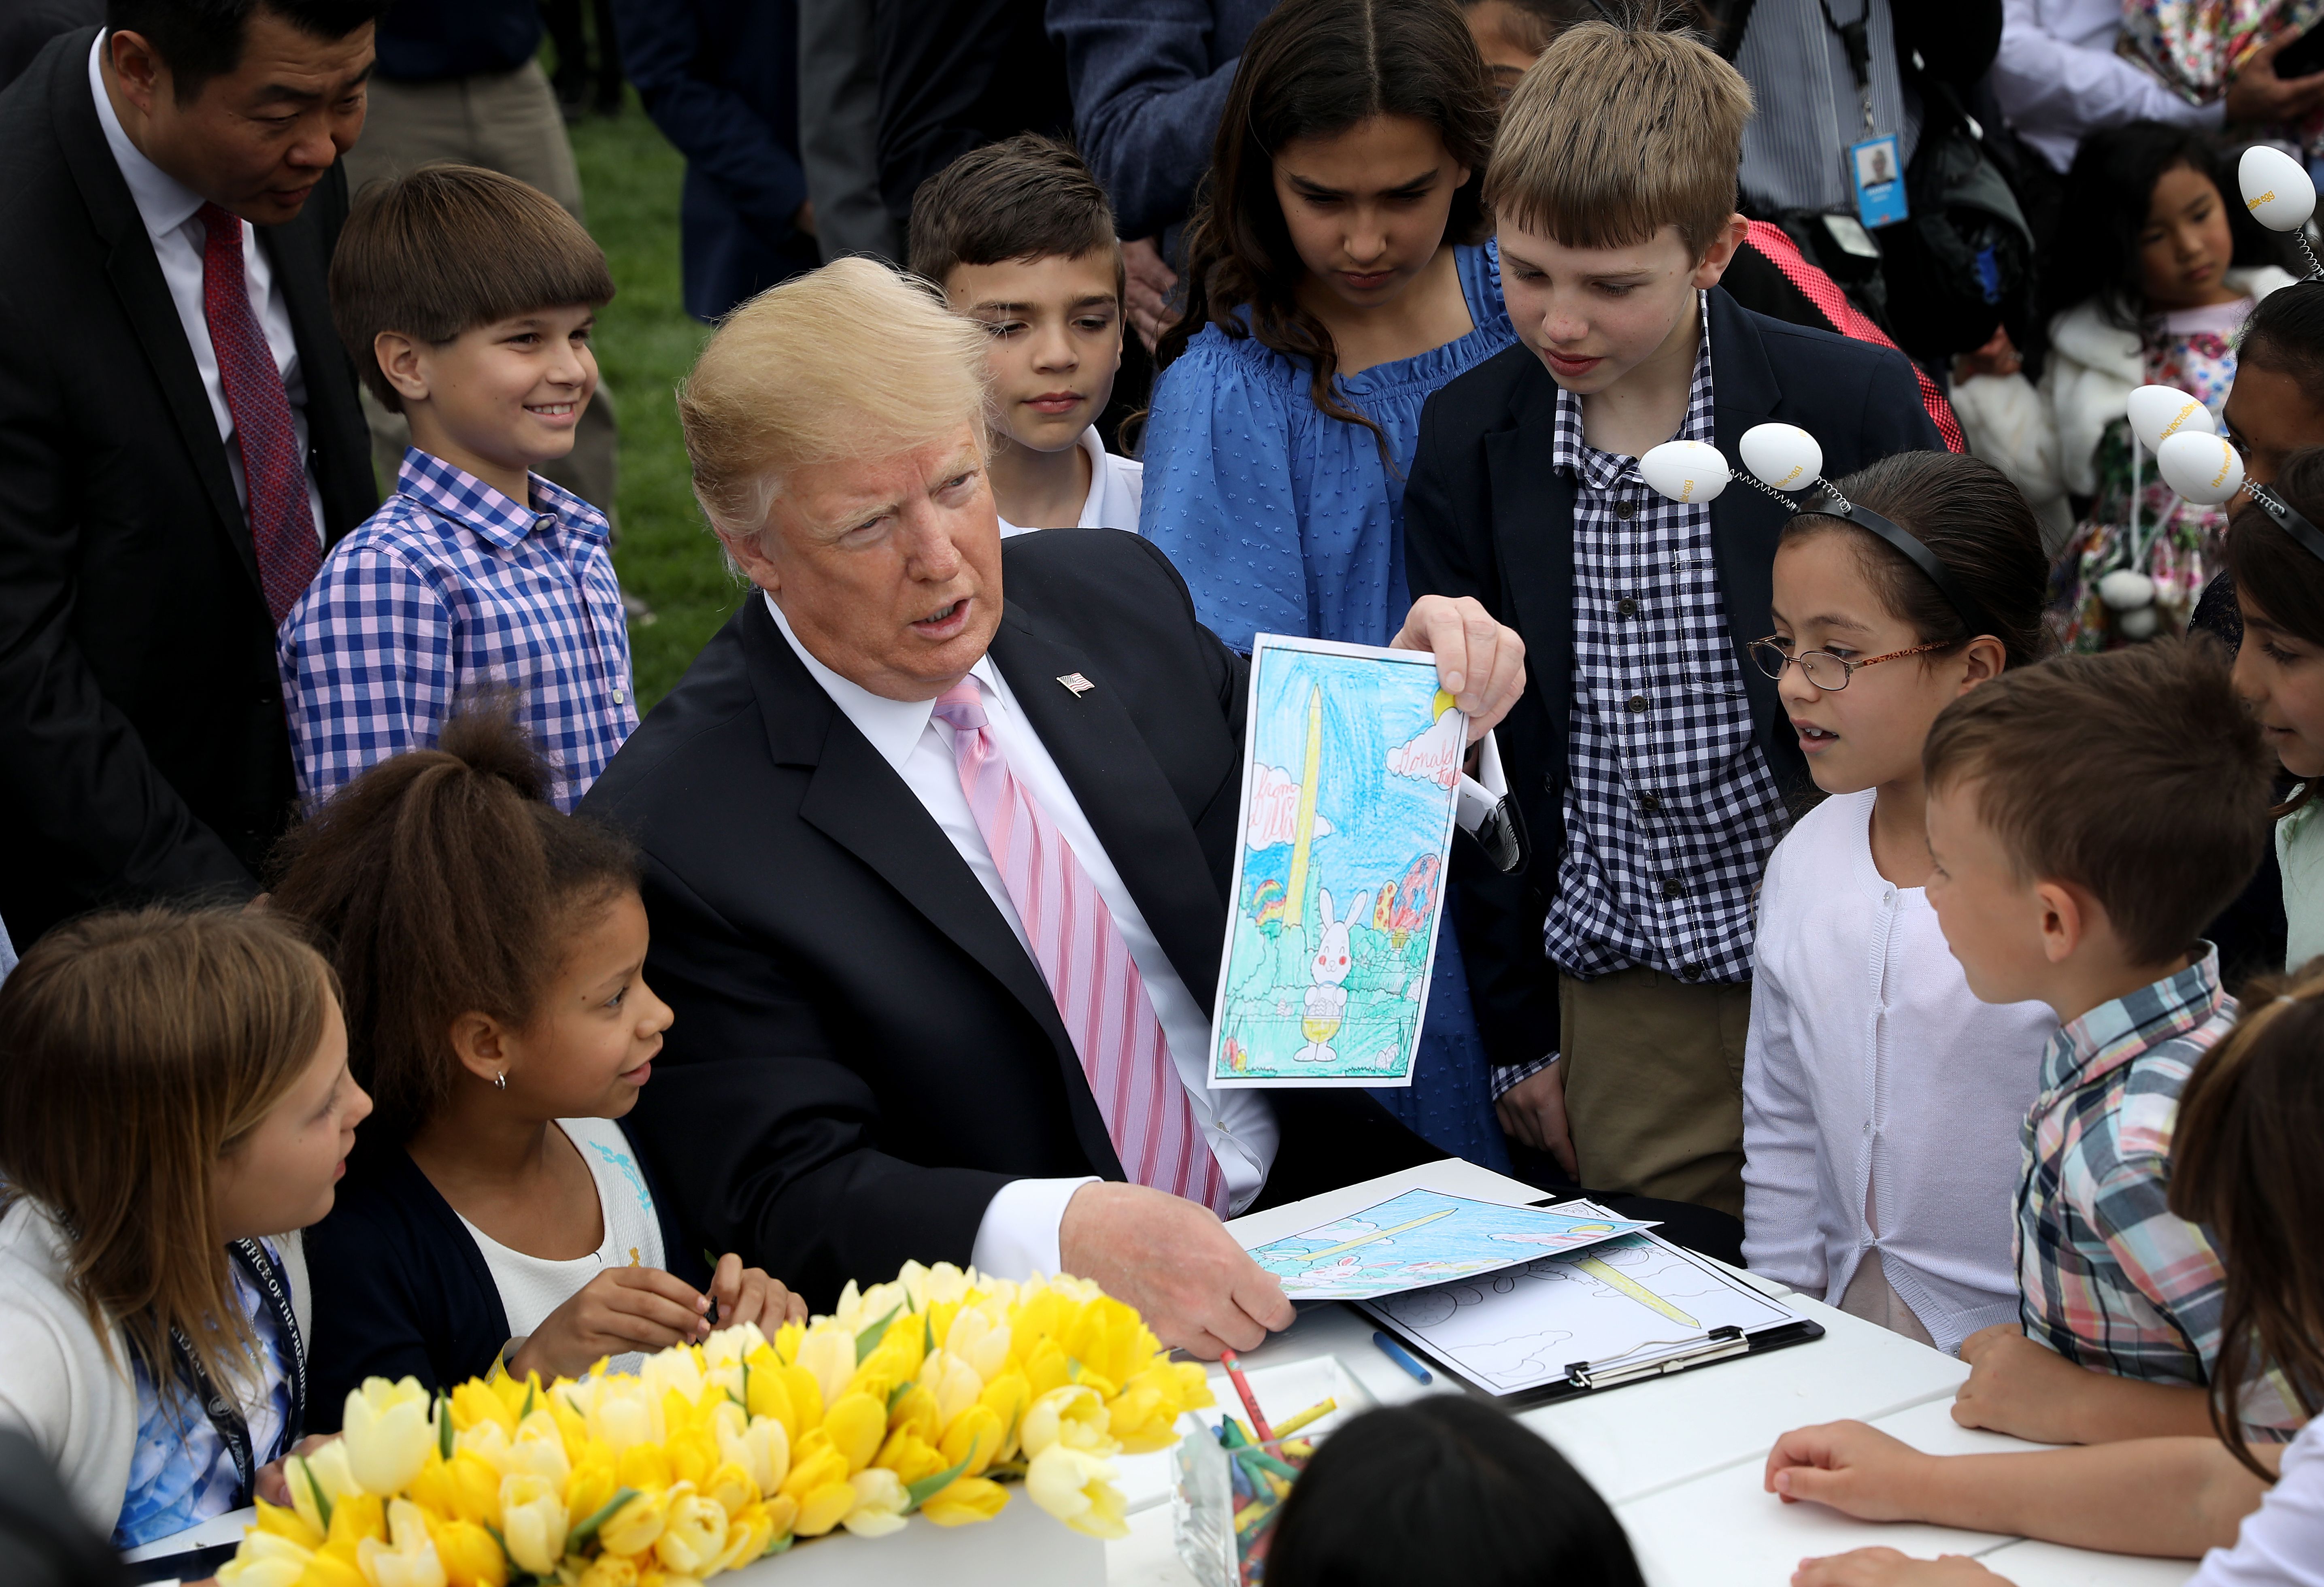 Trump shows off a drawing